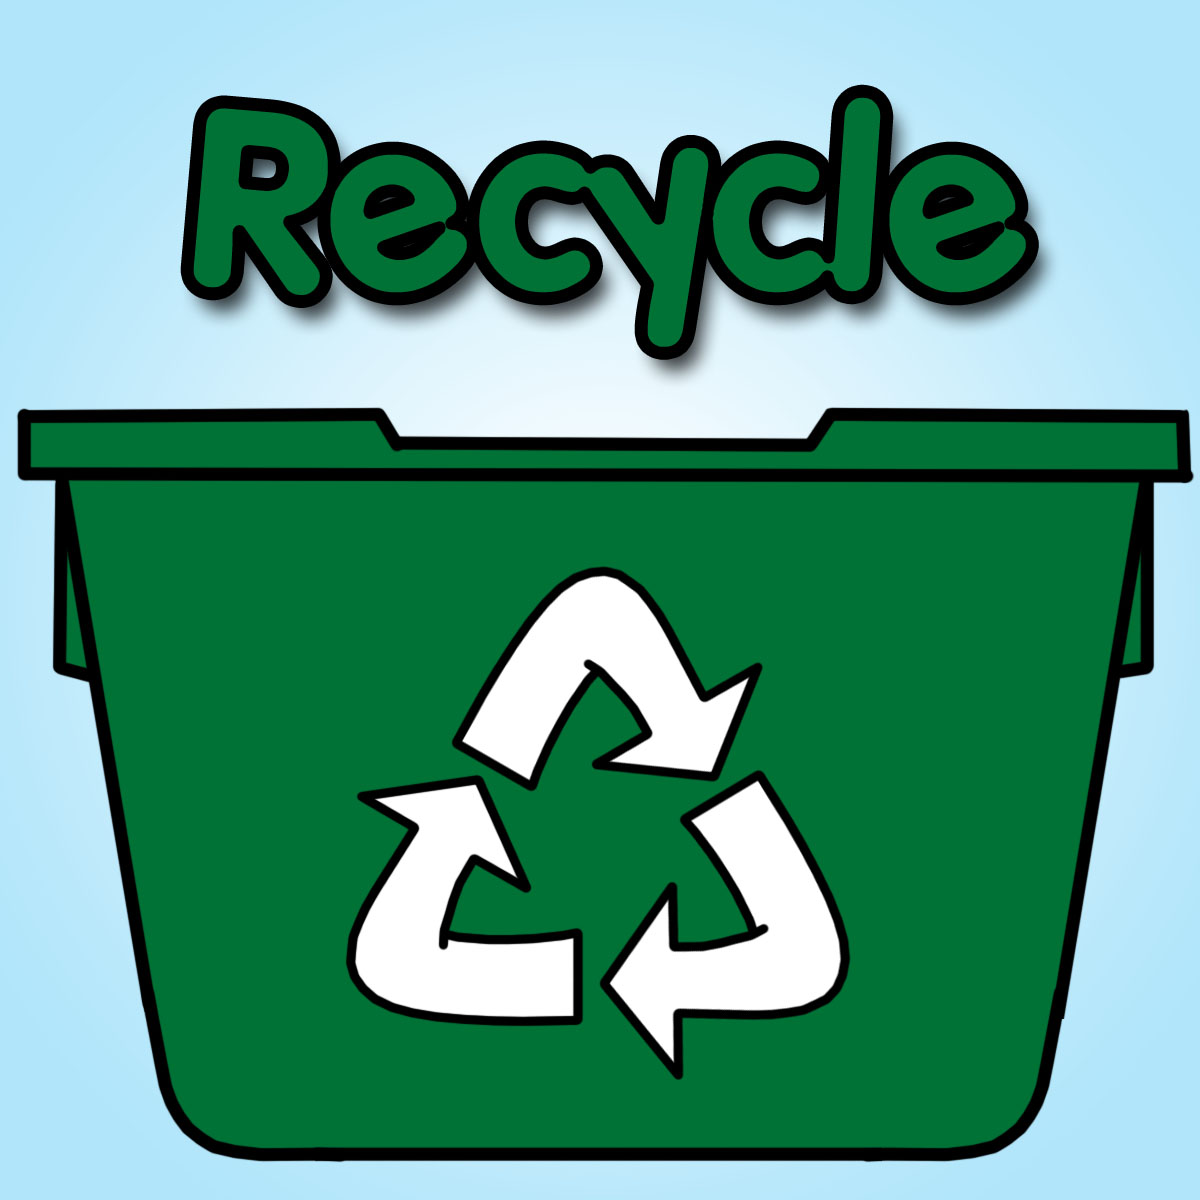 Recycle Clipart - Recycle Bin Clipart